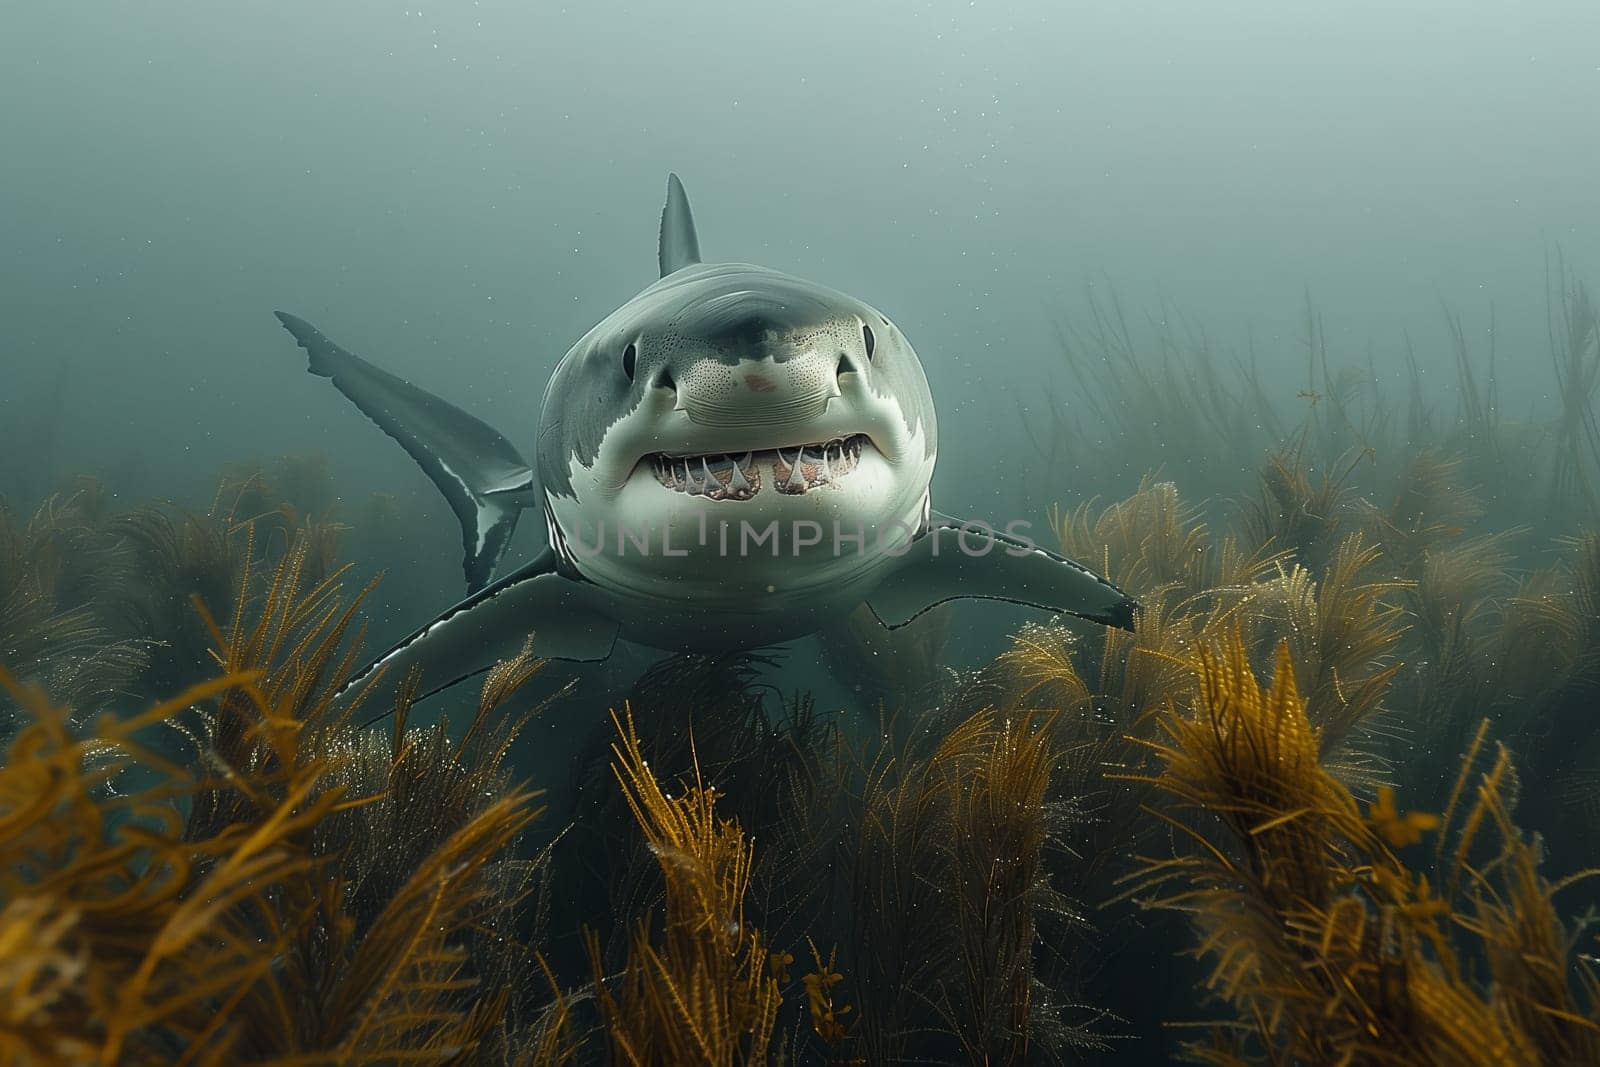 A great white shark, a vertebrate organism, is gracefully swimming in the underwater landscape surrounded by seaweed in the electric blue fluid of the ocean